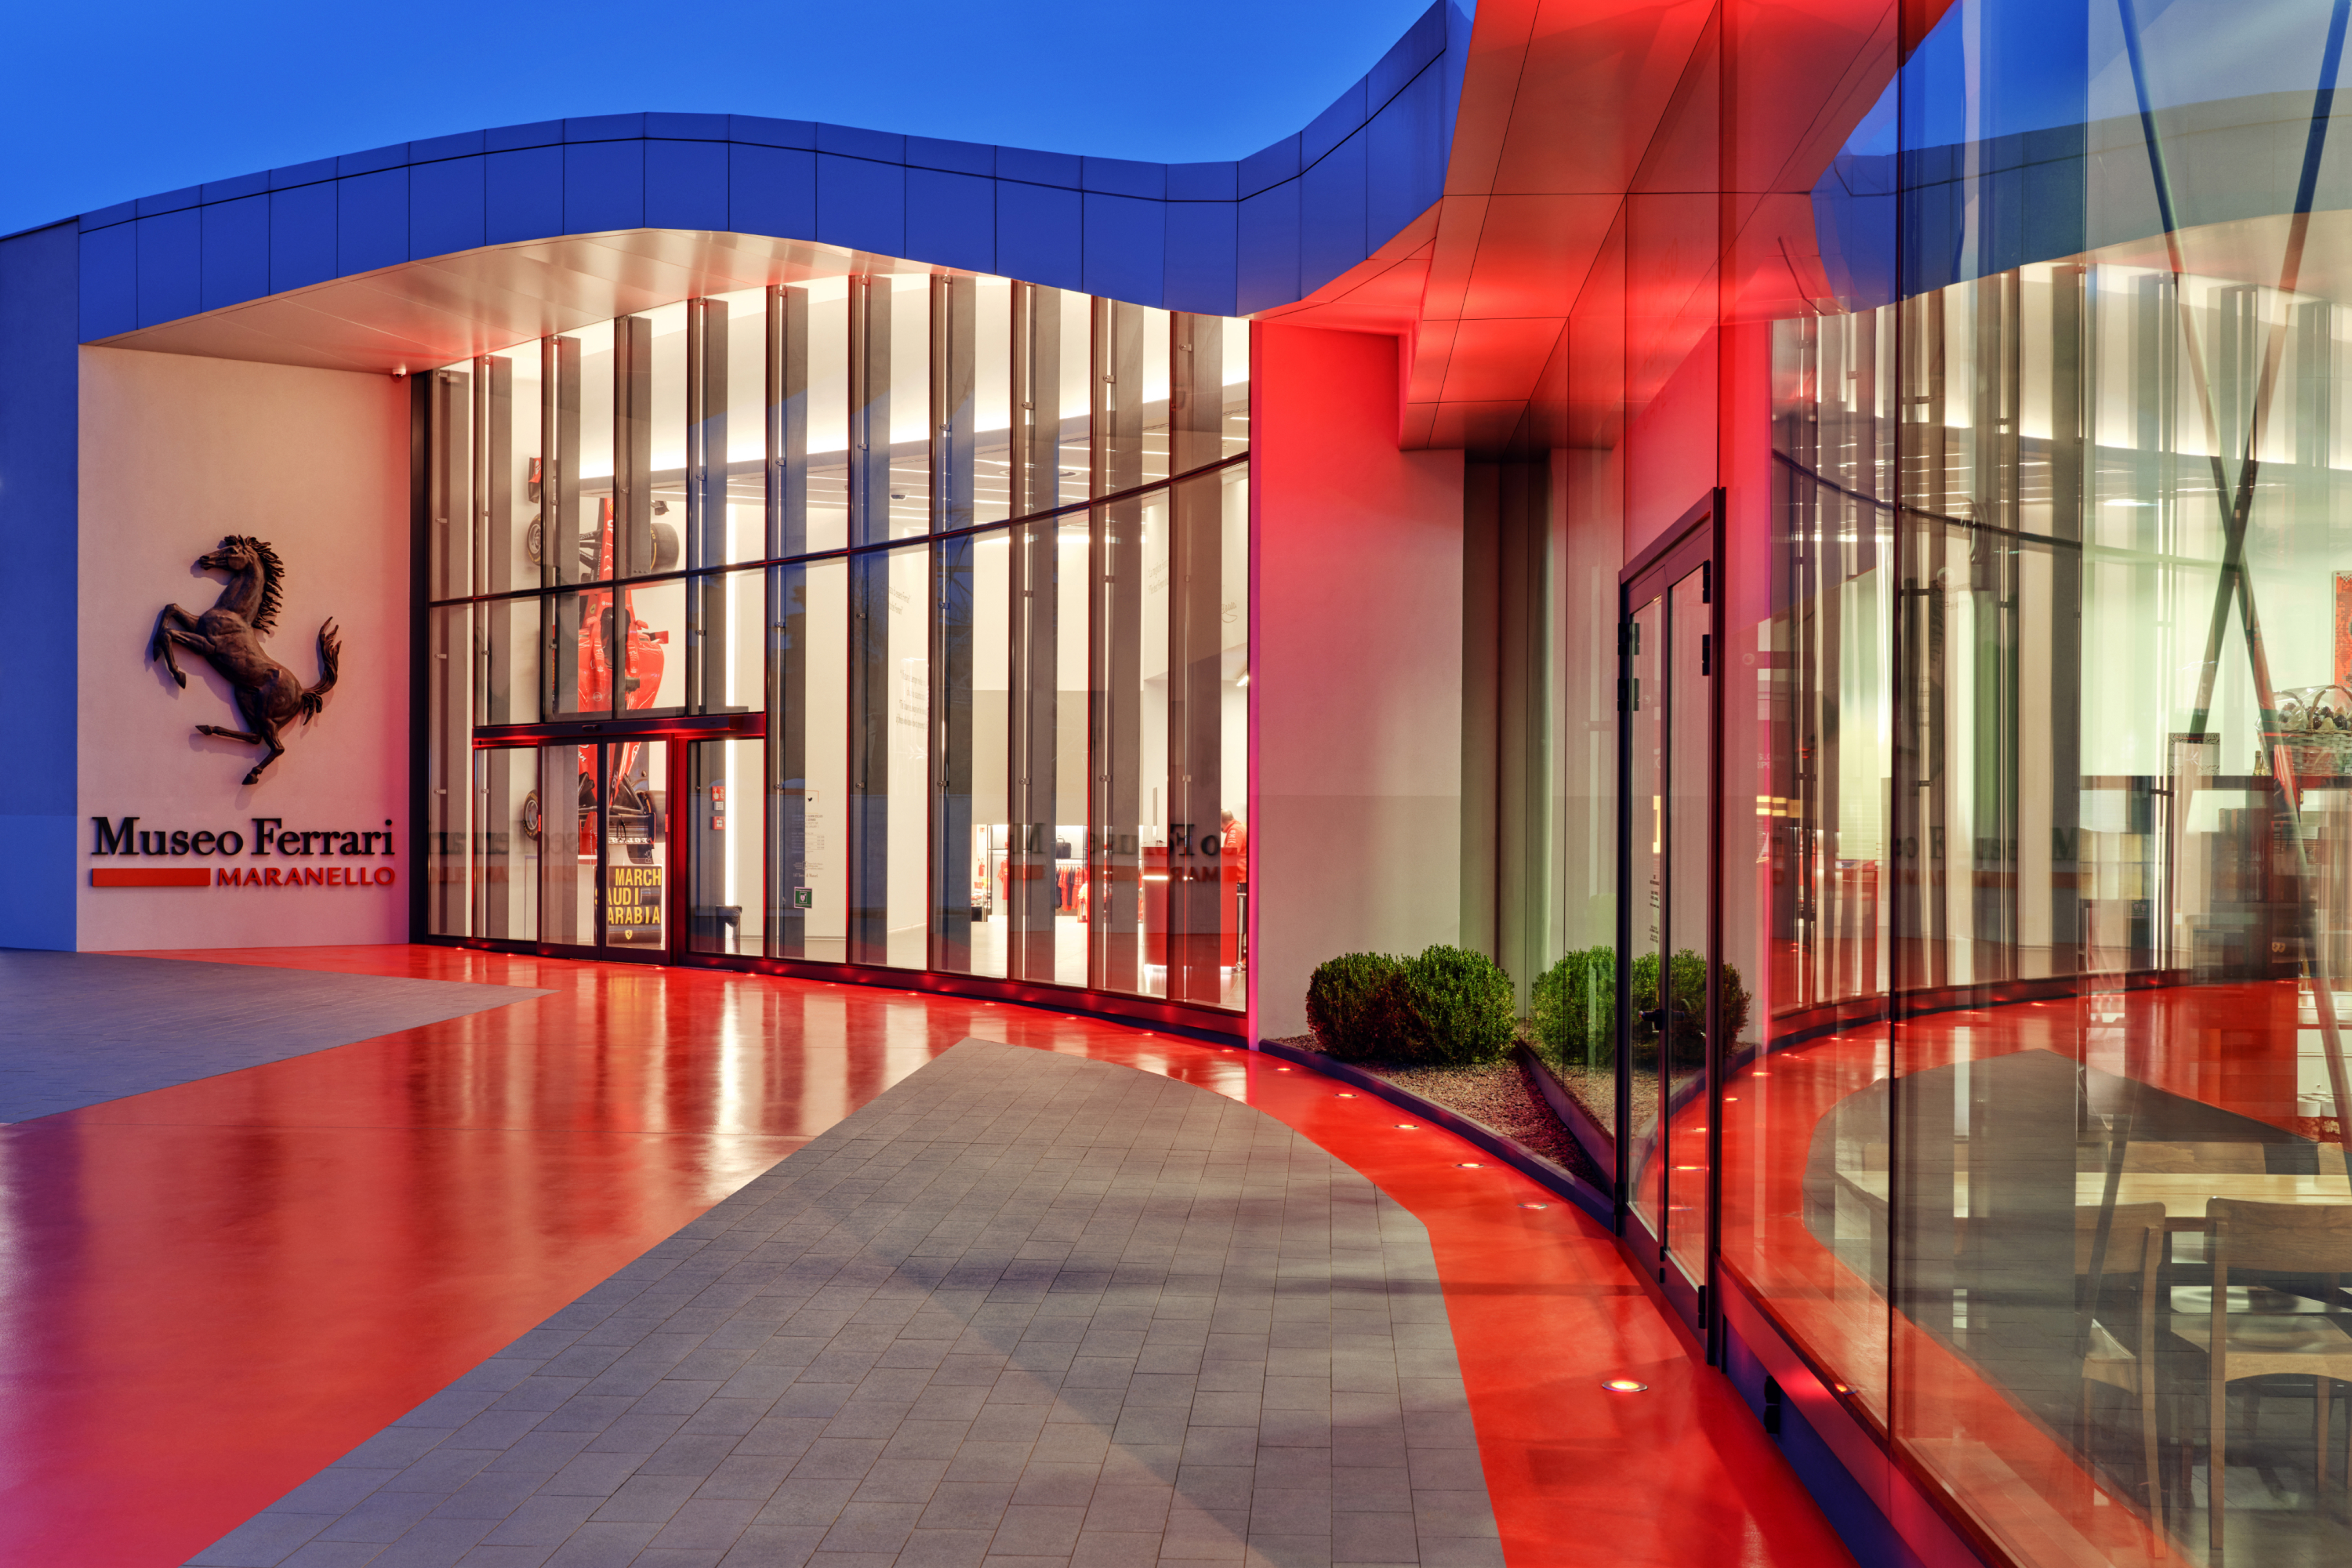 Exterior view of Museo Ferrari with lit facade and emblem, reflecting the brand&#x27;s automotive heritage